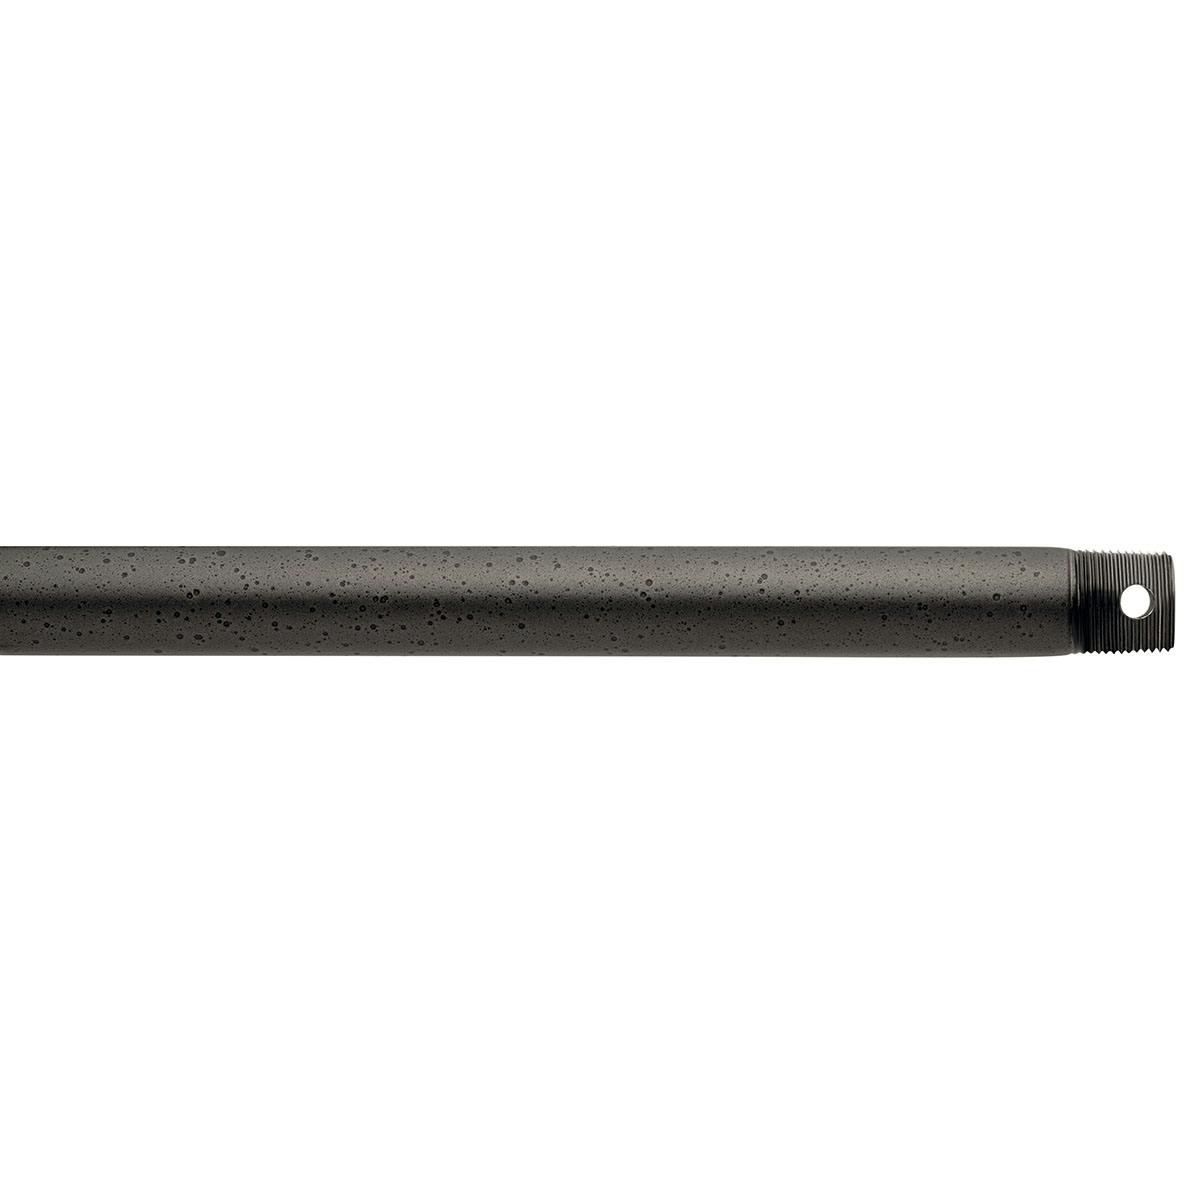 Dual Threaded 60" Downrod Anvil Iron on a white background